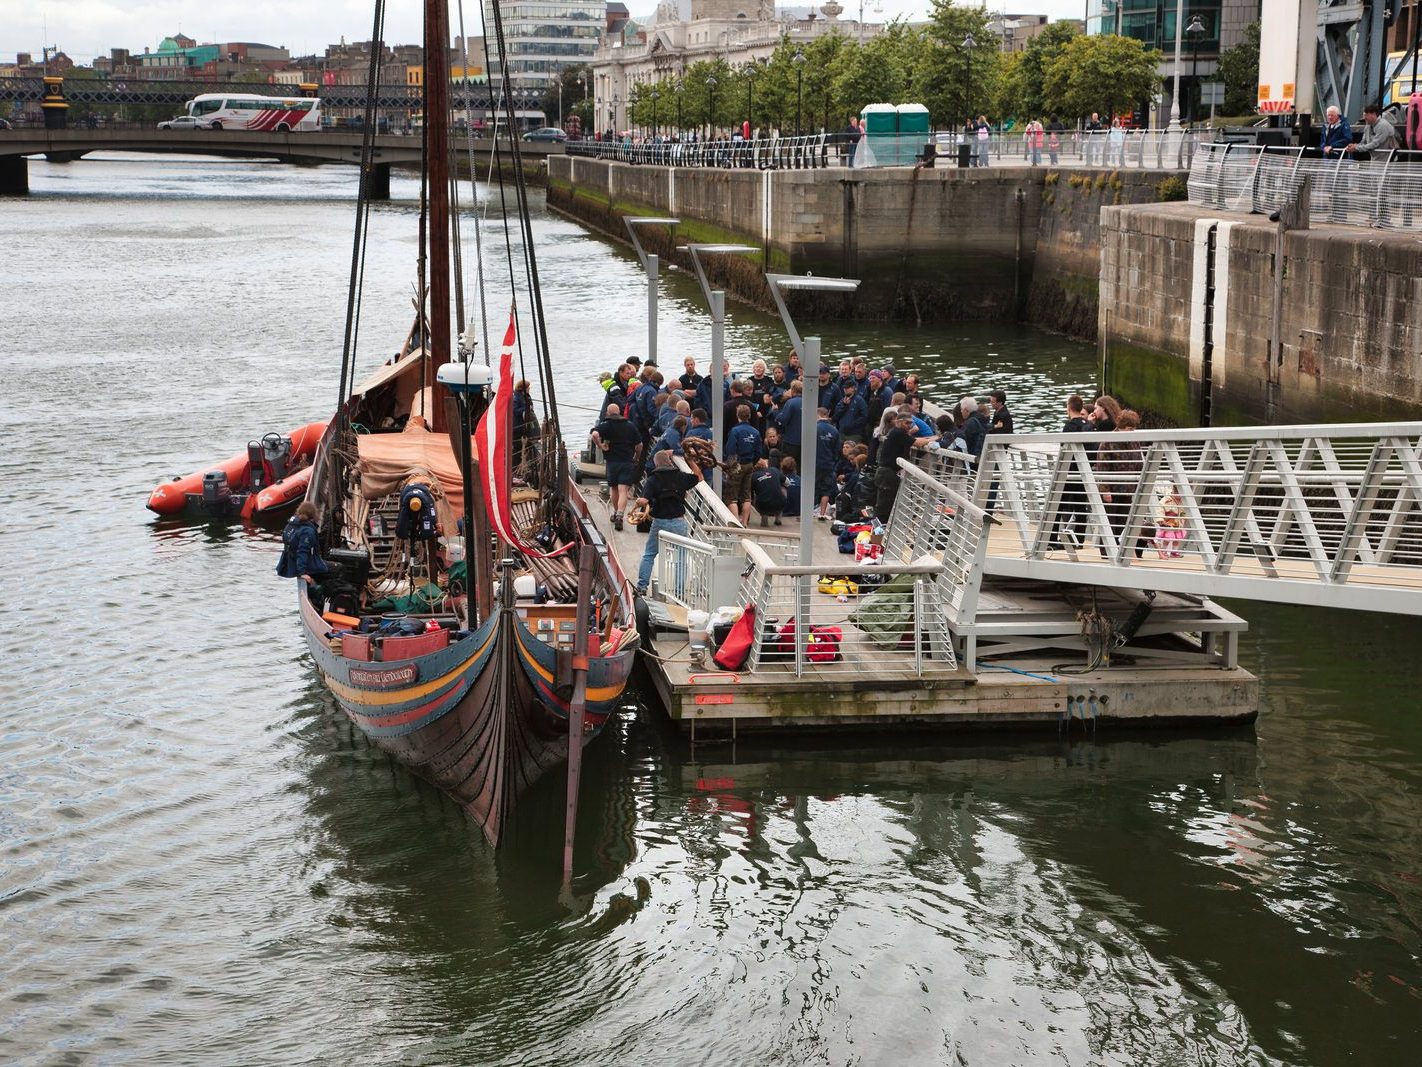 THE SEA STALLION FROM GLEANDALOUGH WAS LIFTED INTO THE LIFFEY USING A LARGE CRANE 010